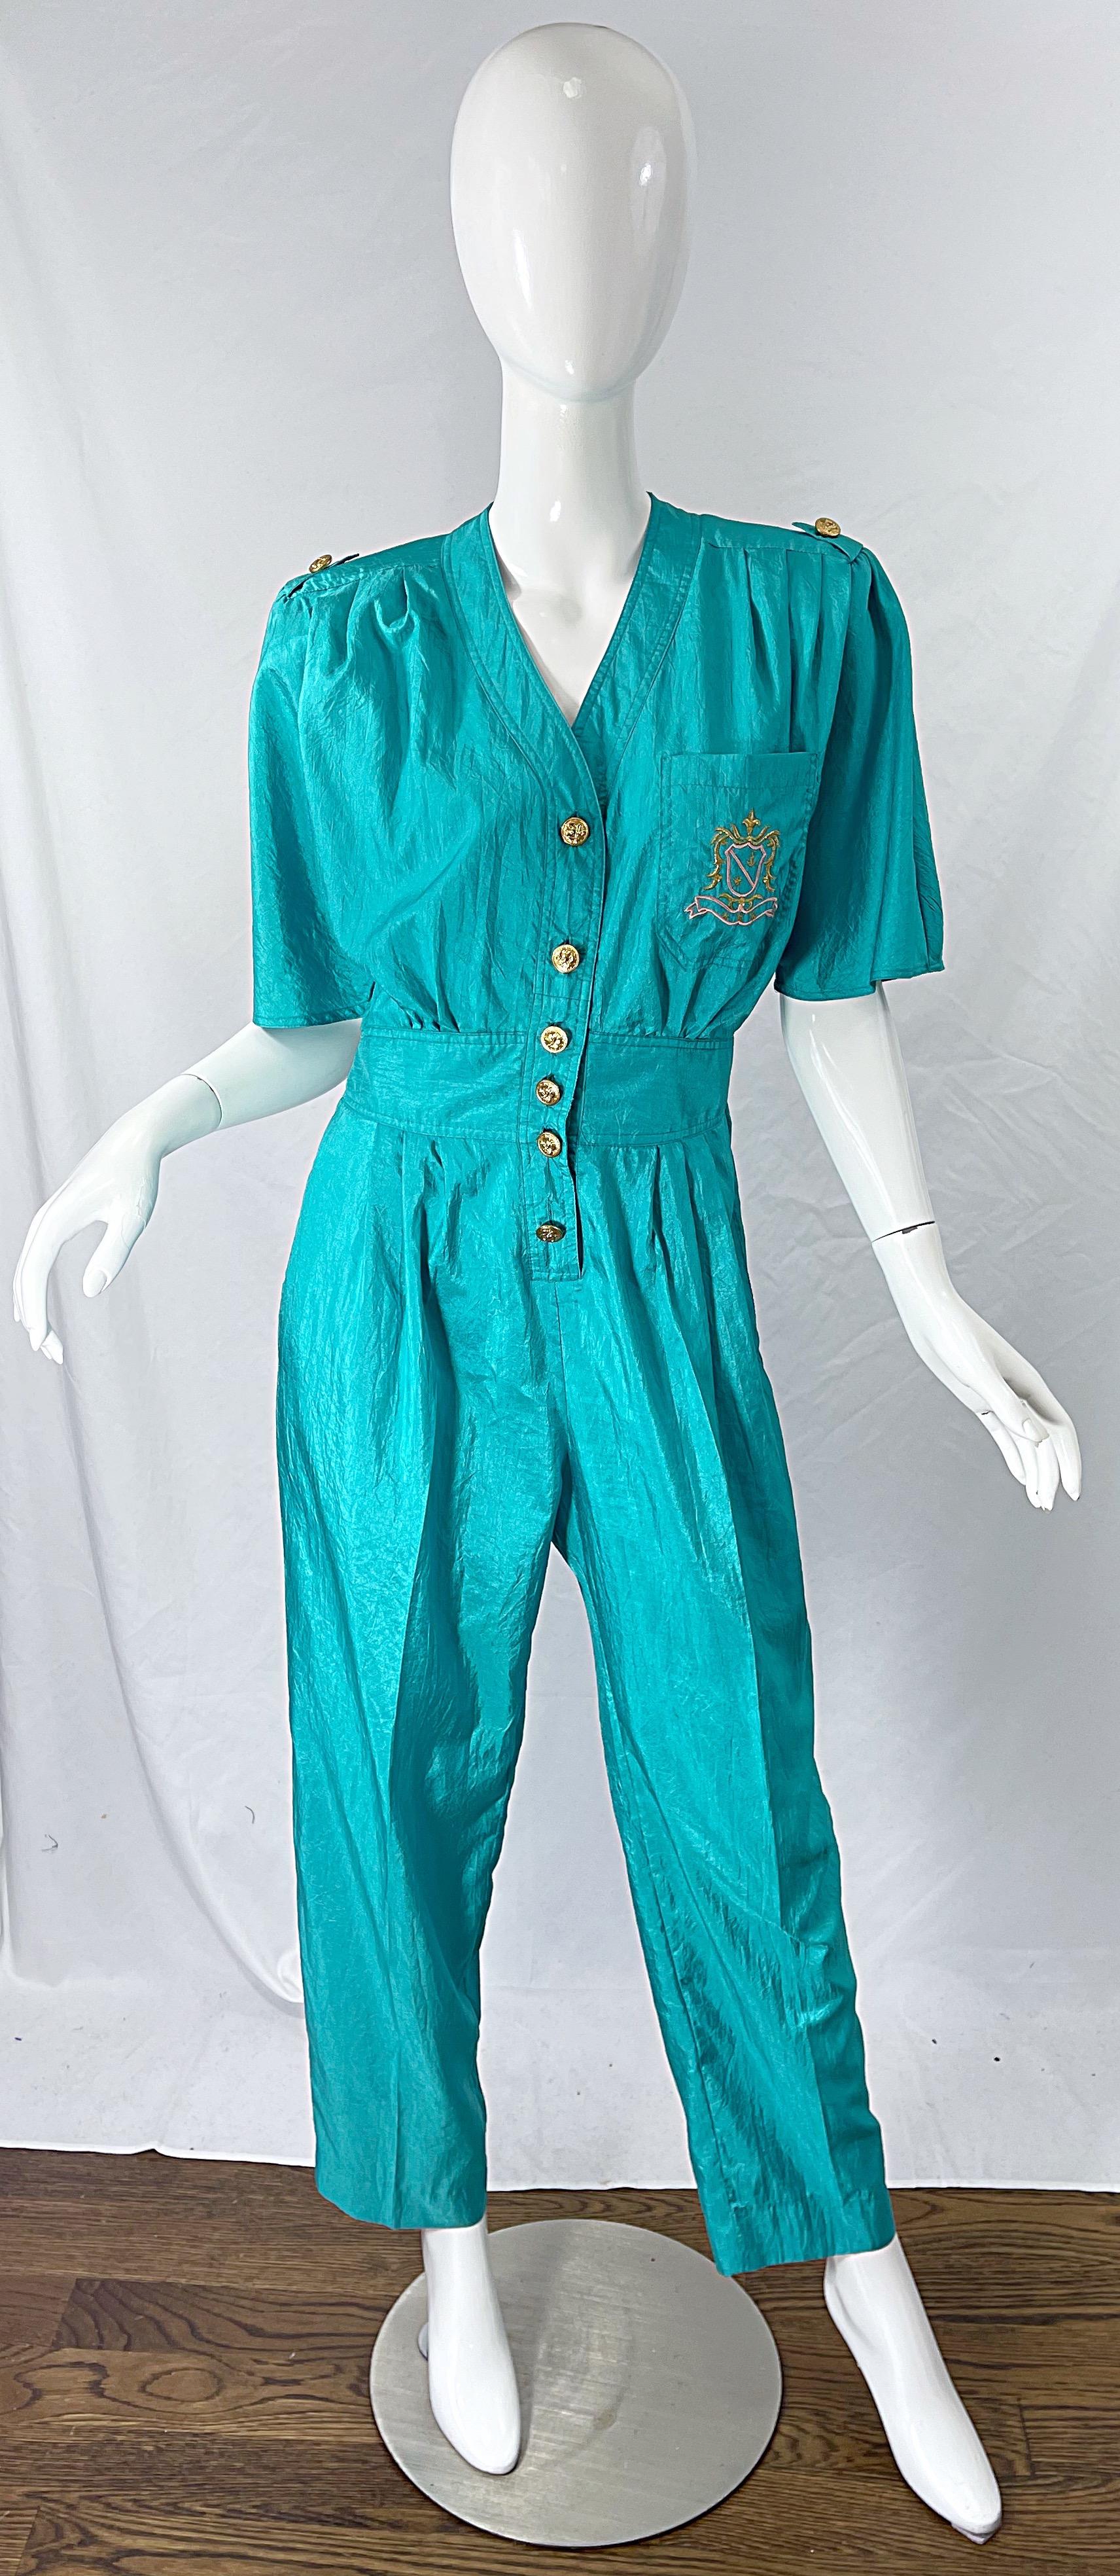 Chic 1980s teal blue green jumpsuit ! The perfect teal color that looks fantastic on any skin tone. Crescent embroidered detail in pink and gold at left breast pocket. Soft lightweight windbreaker fabric. 
Anchor embossed gold buttons up the front.